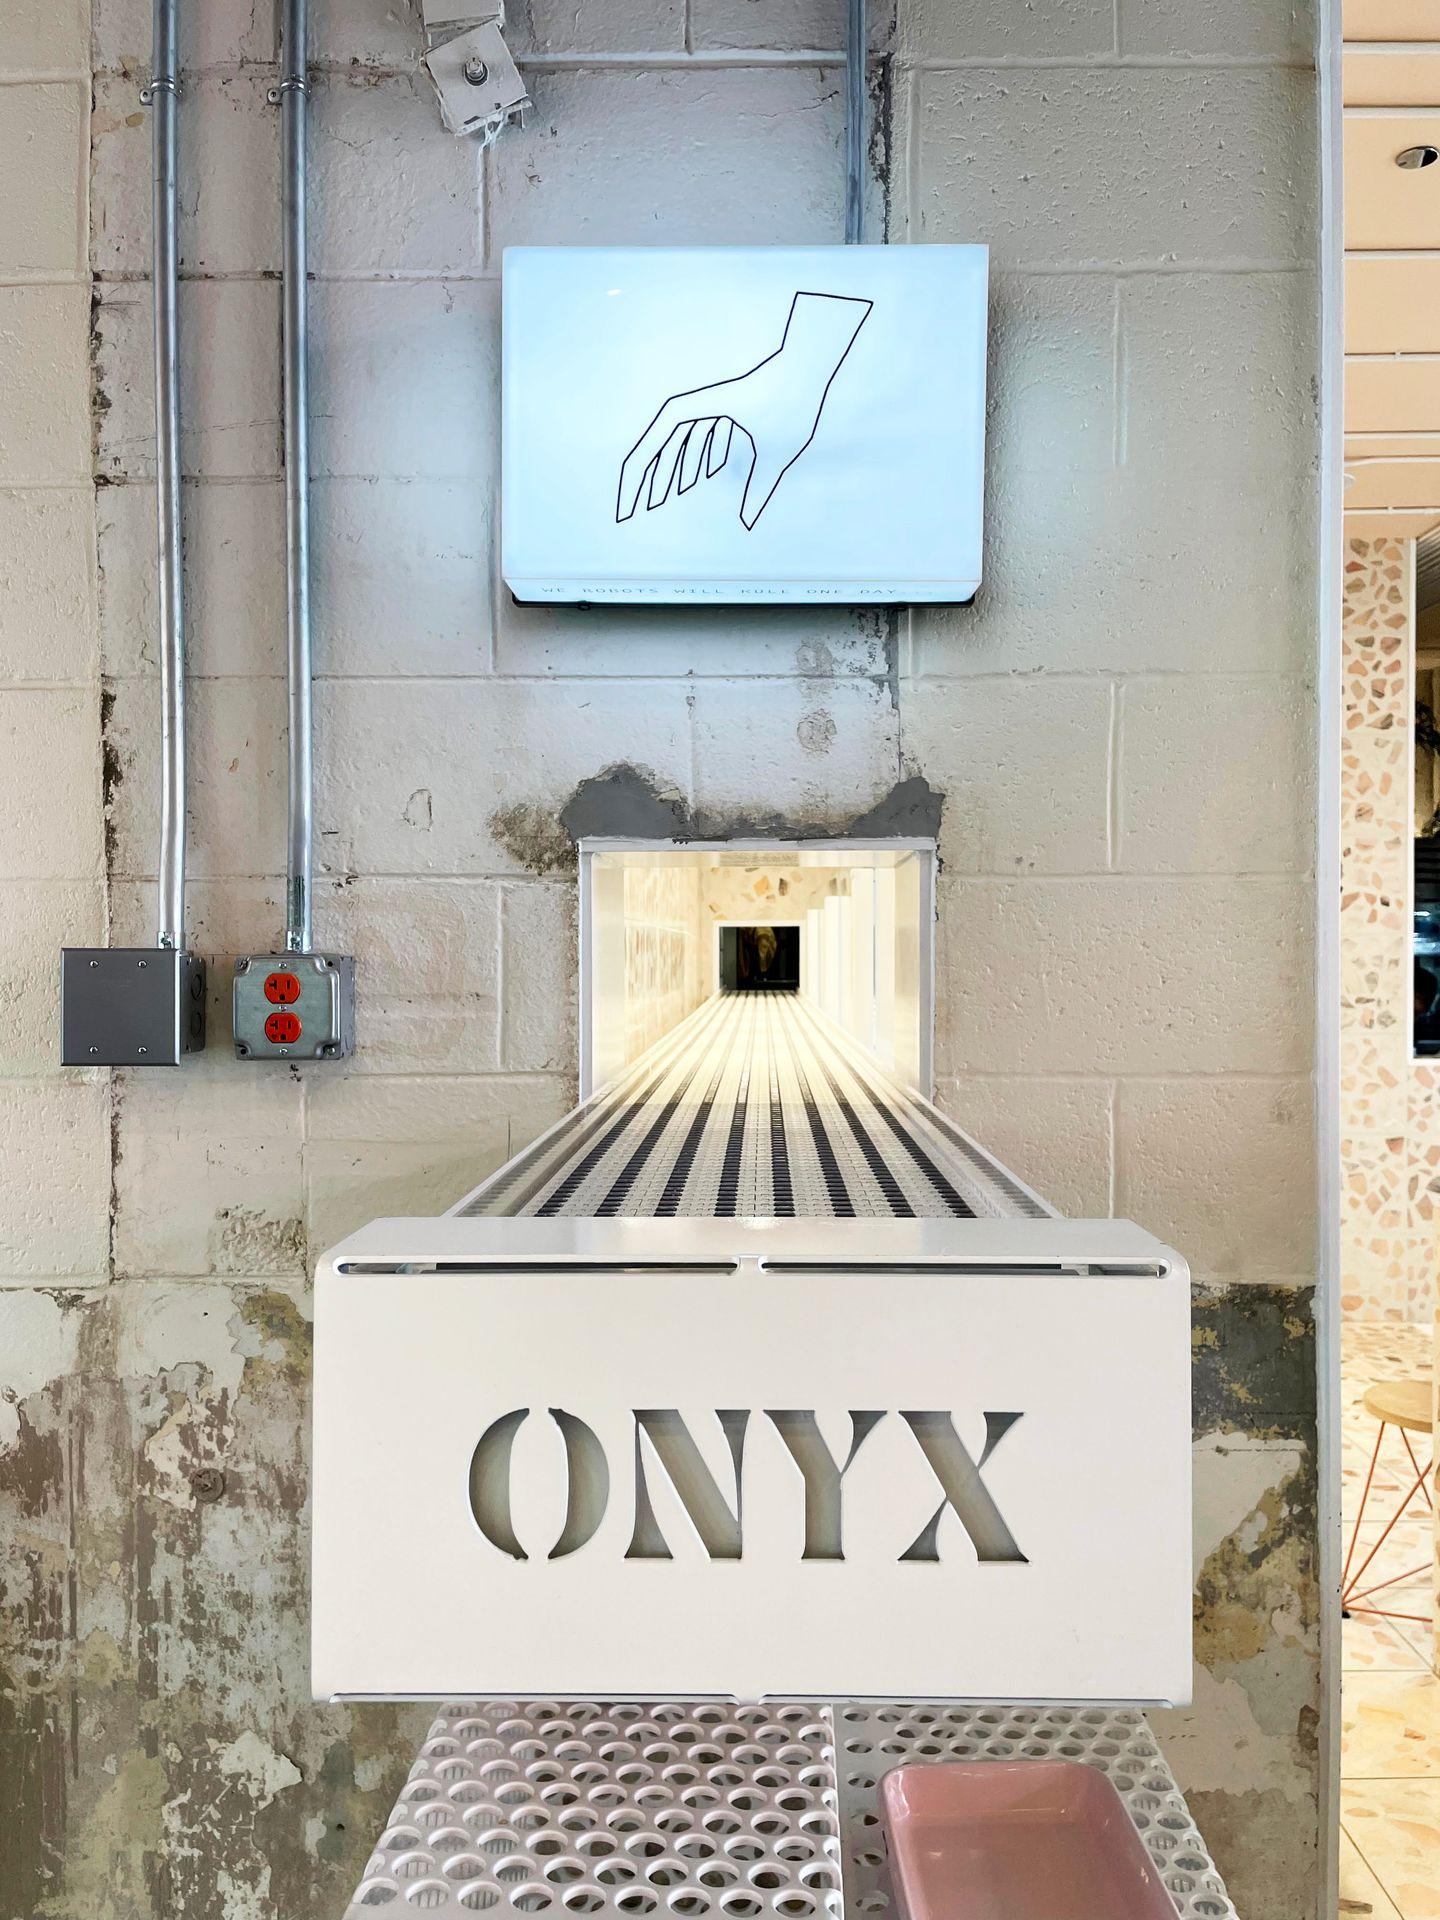 A conveyor belt with the word "onyx" on the end. There is an image of a hand above it.